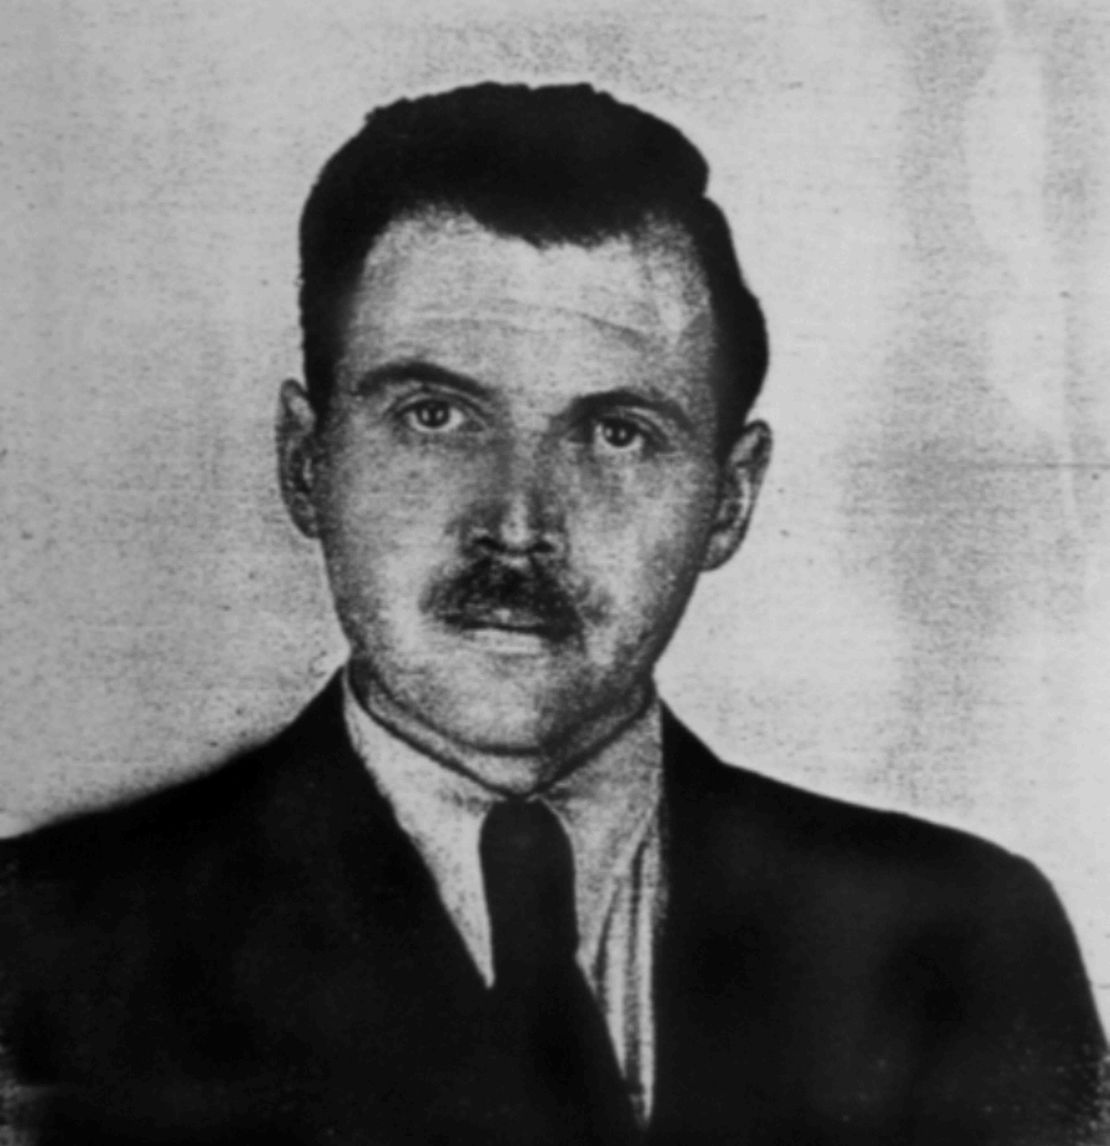 Josef Mengele (1911-1979), German SS officer. Photo taken by a police photographer in 1956 in Buenos Aires for Mengele's Argentine identification document. (Photo by: Universal History Archive/Universal Images Group via Getty Images)